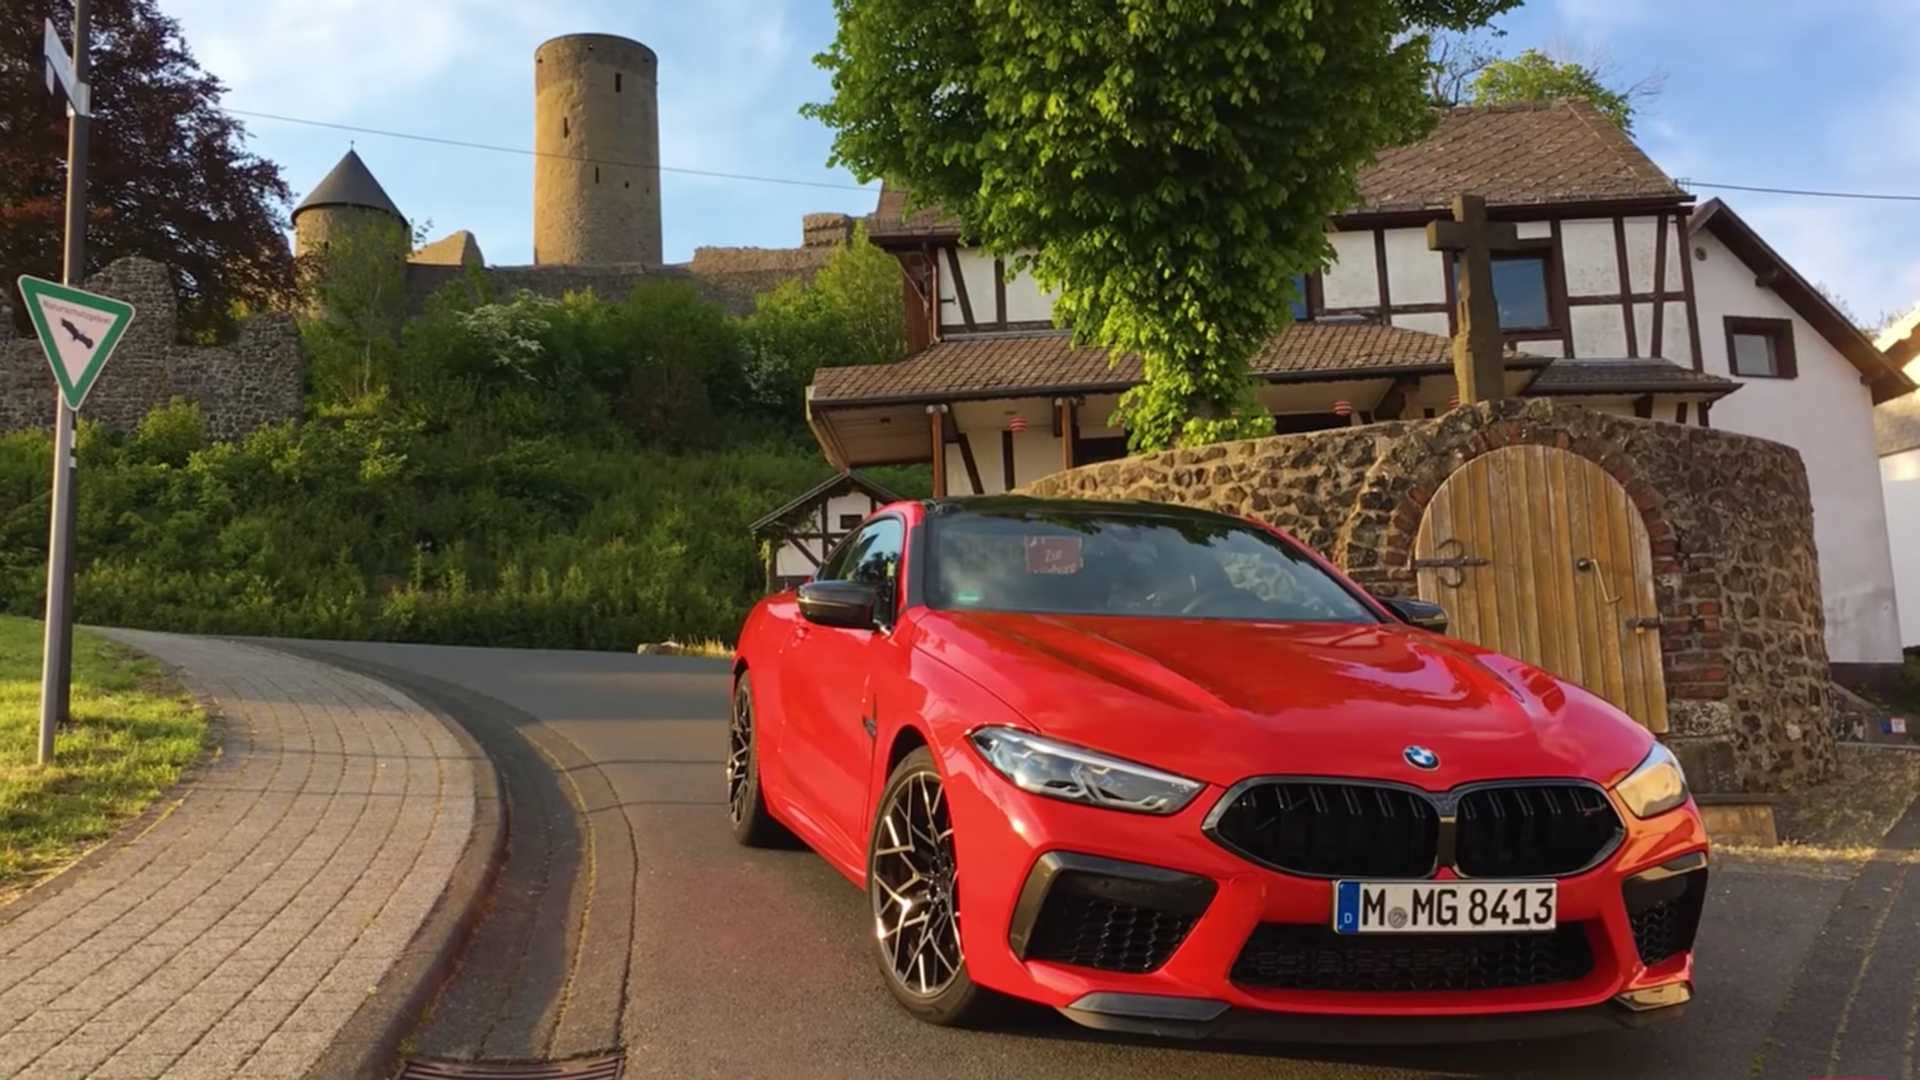 The BMW M8 Competition takes a turn at the Nürburgring